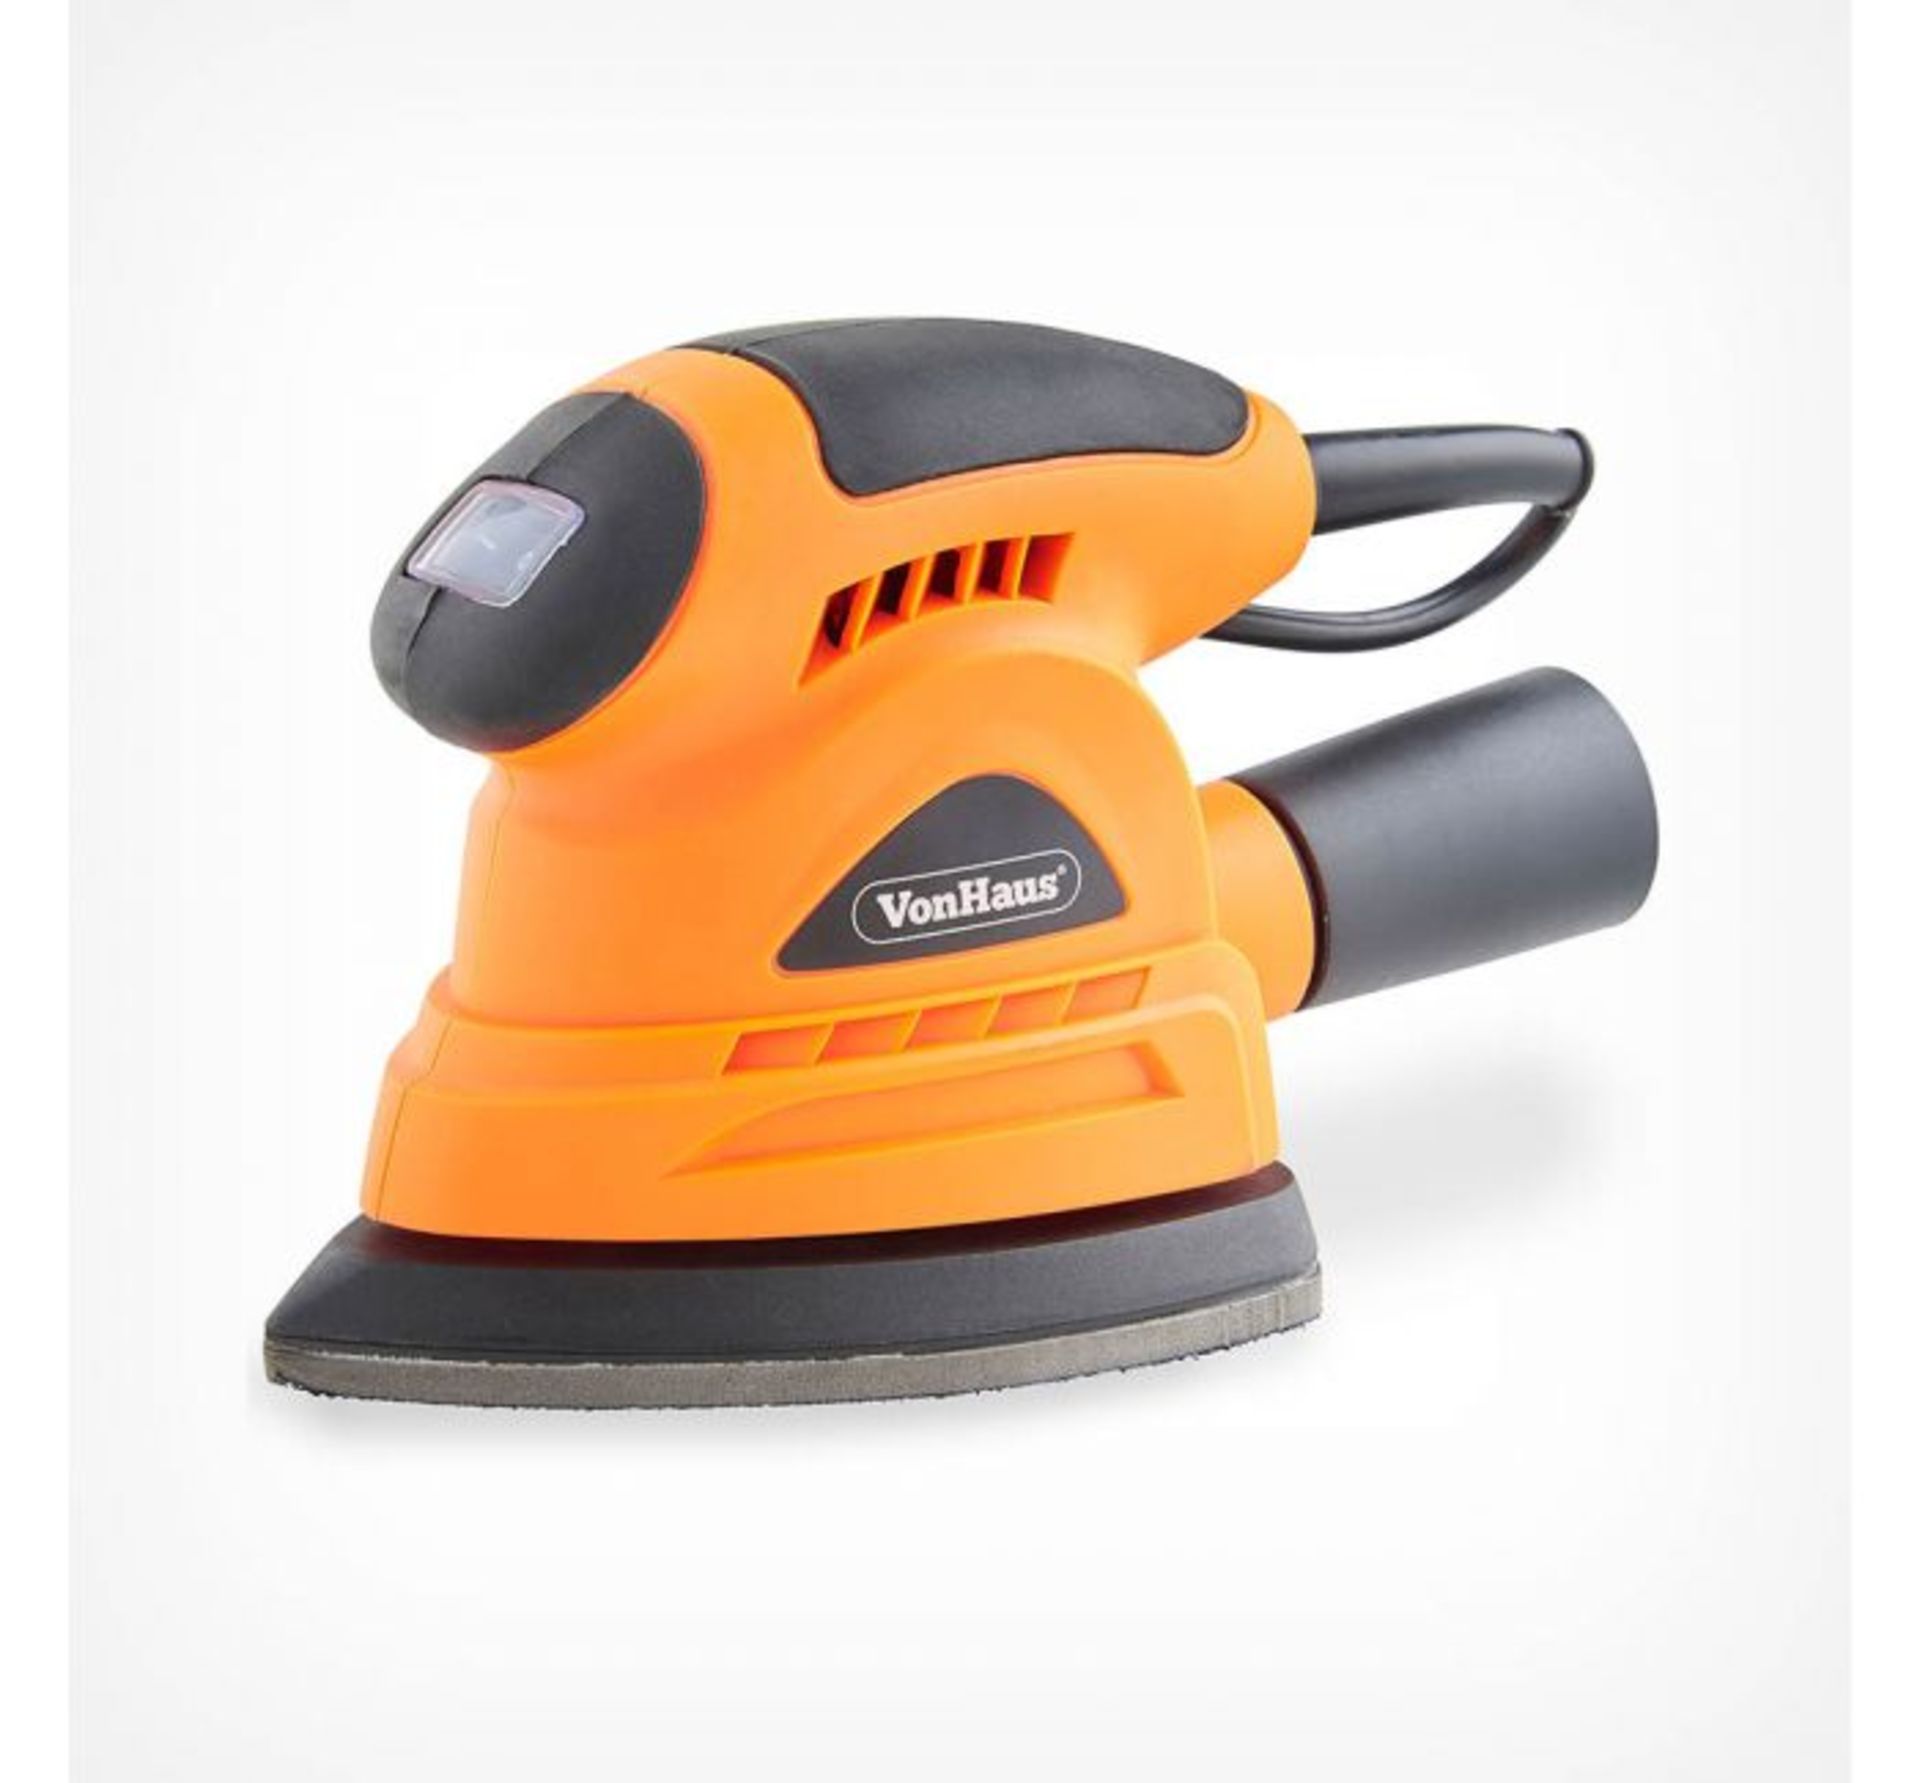 (DD15) 130W Detail Sander Ergonomic design with soft grip handle makes light and comfortable w...